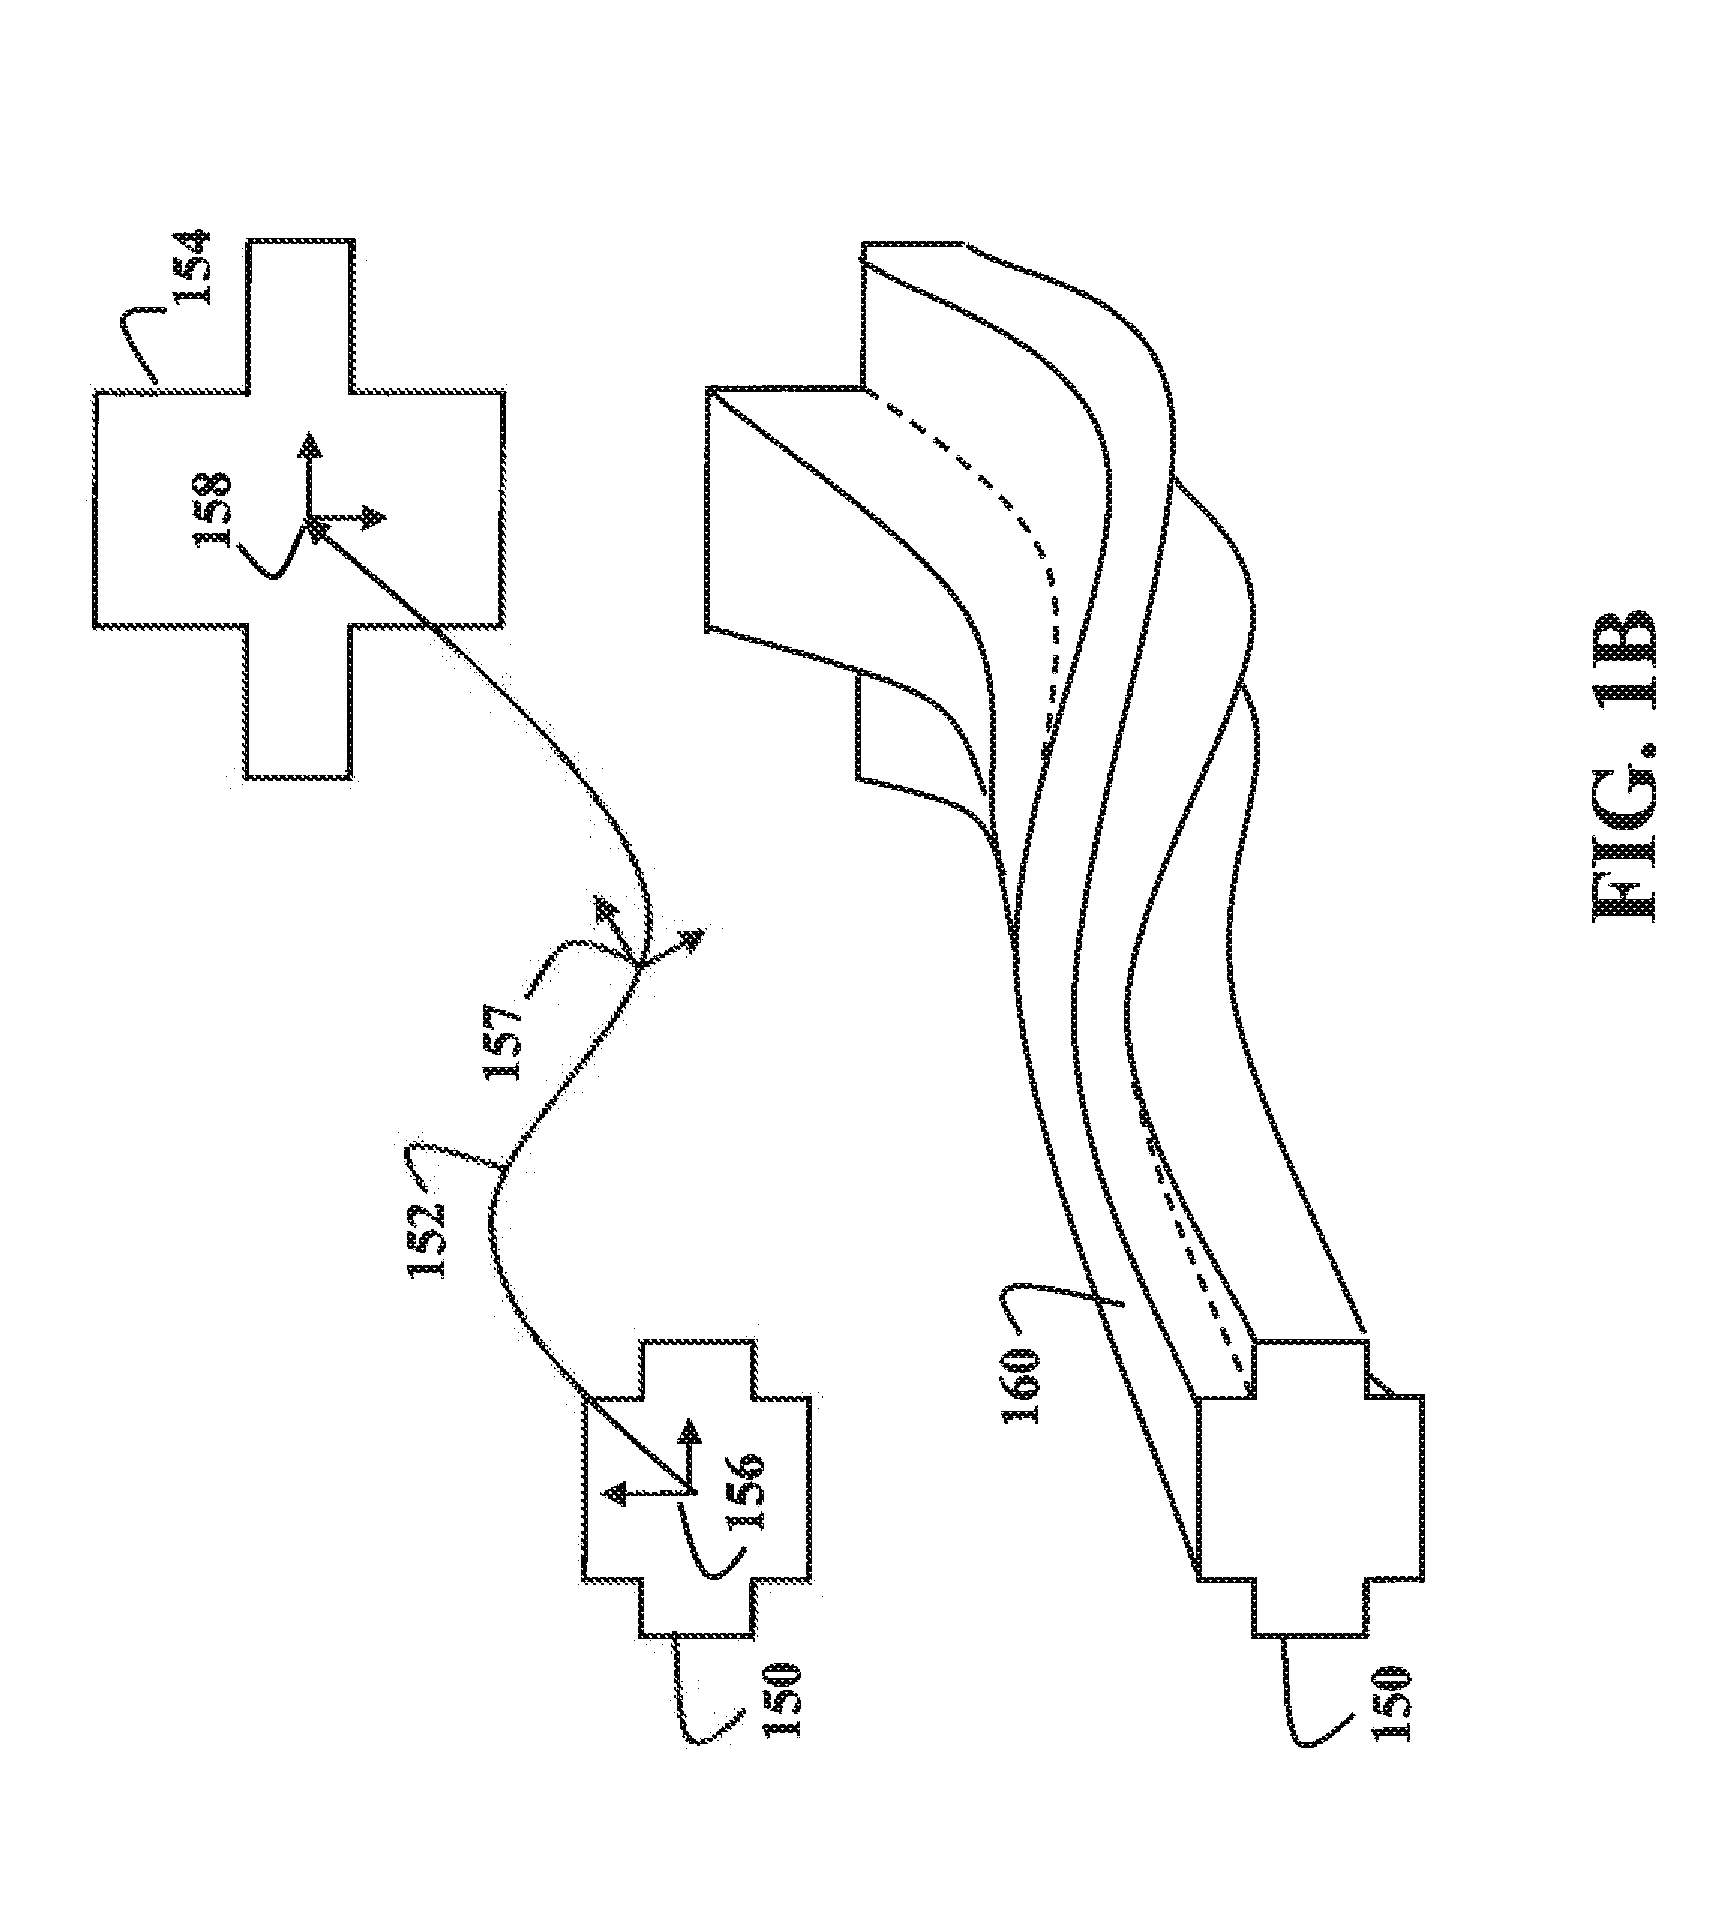 System and Method for Simulating Machining Objects